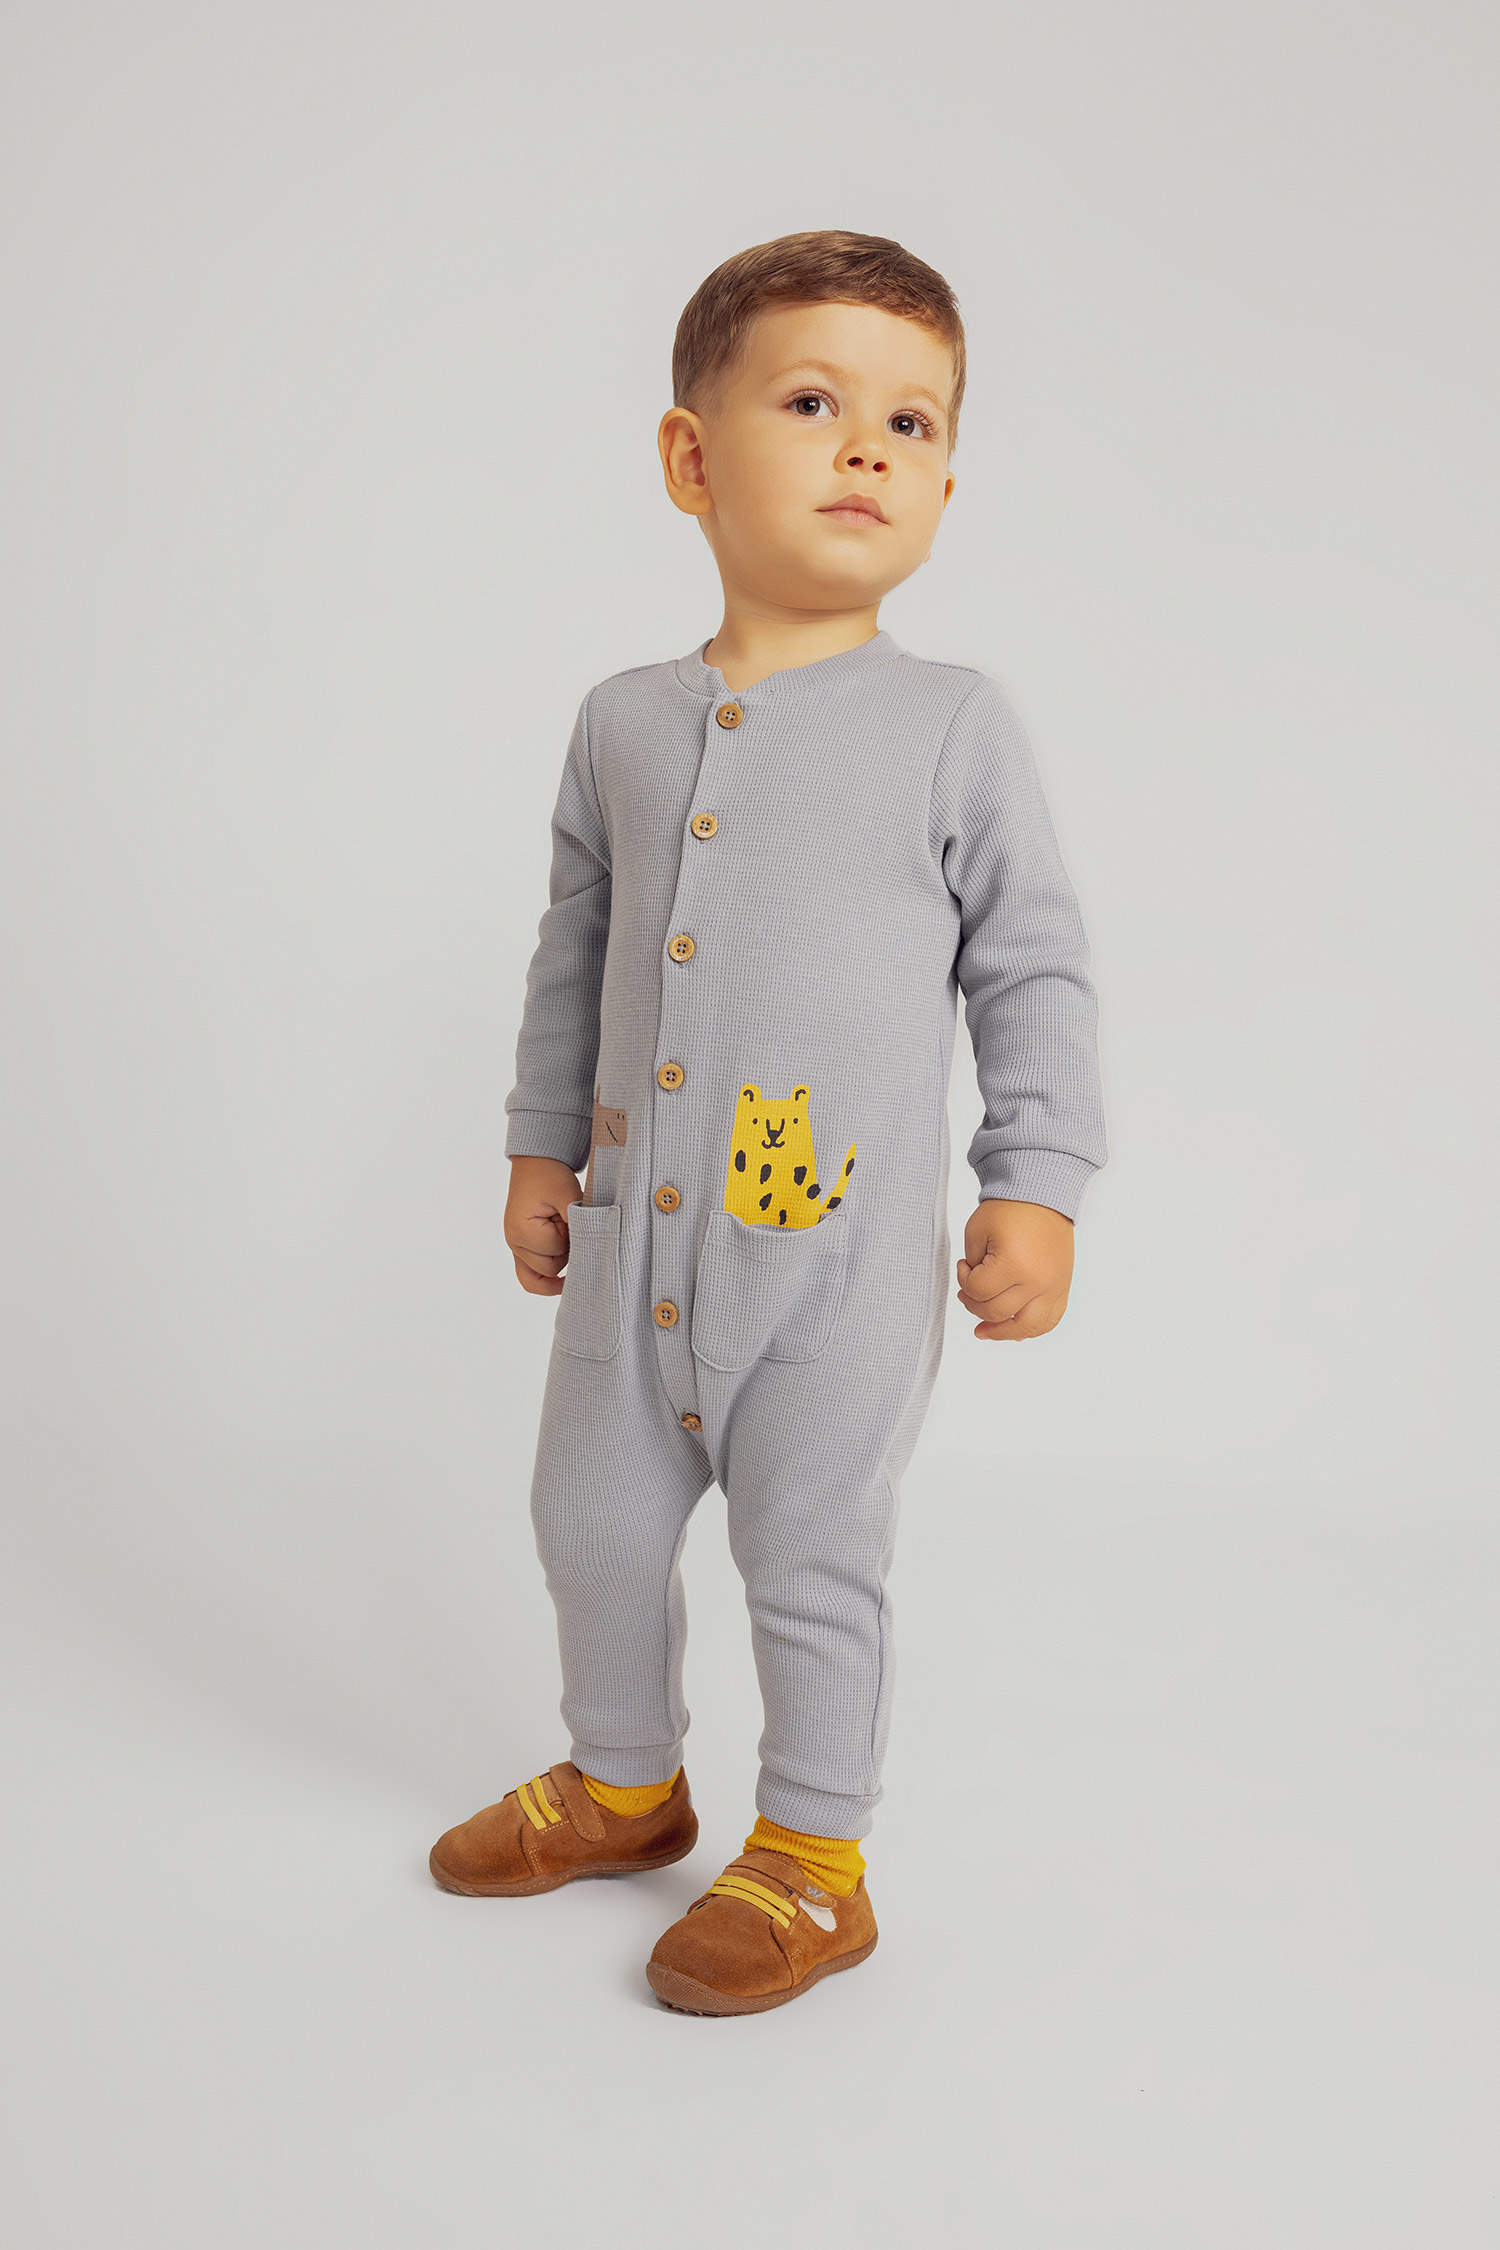 Baby Boy Navy Blue and White Formal Jumpsuit Rompers in India